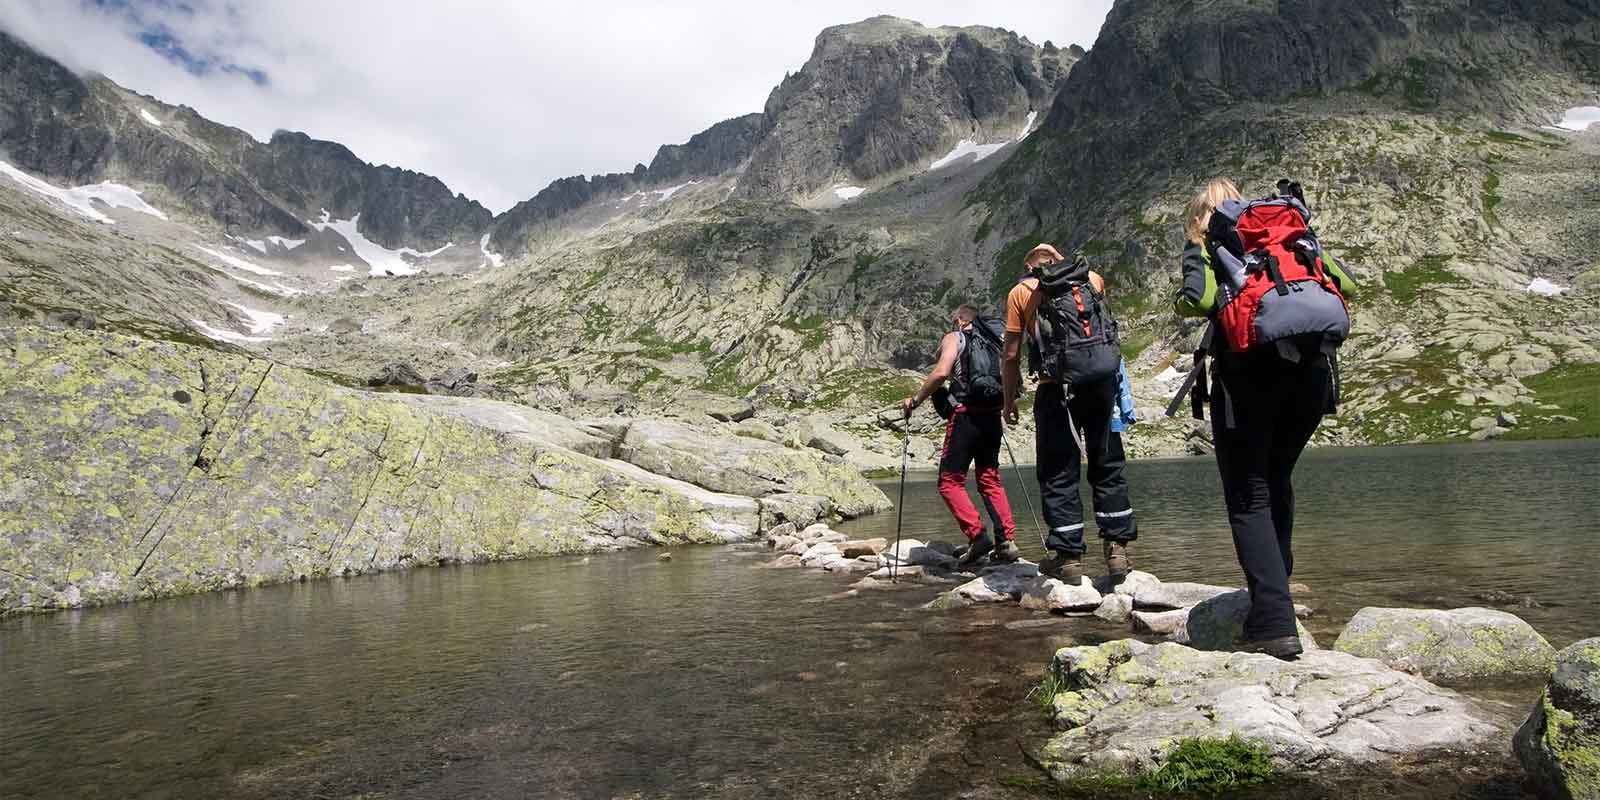 Trekkers crossing water on a mountain expedition